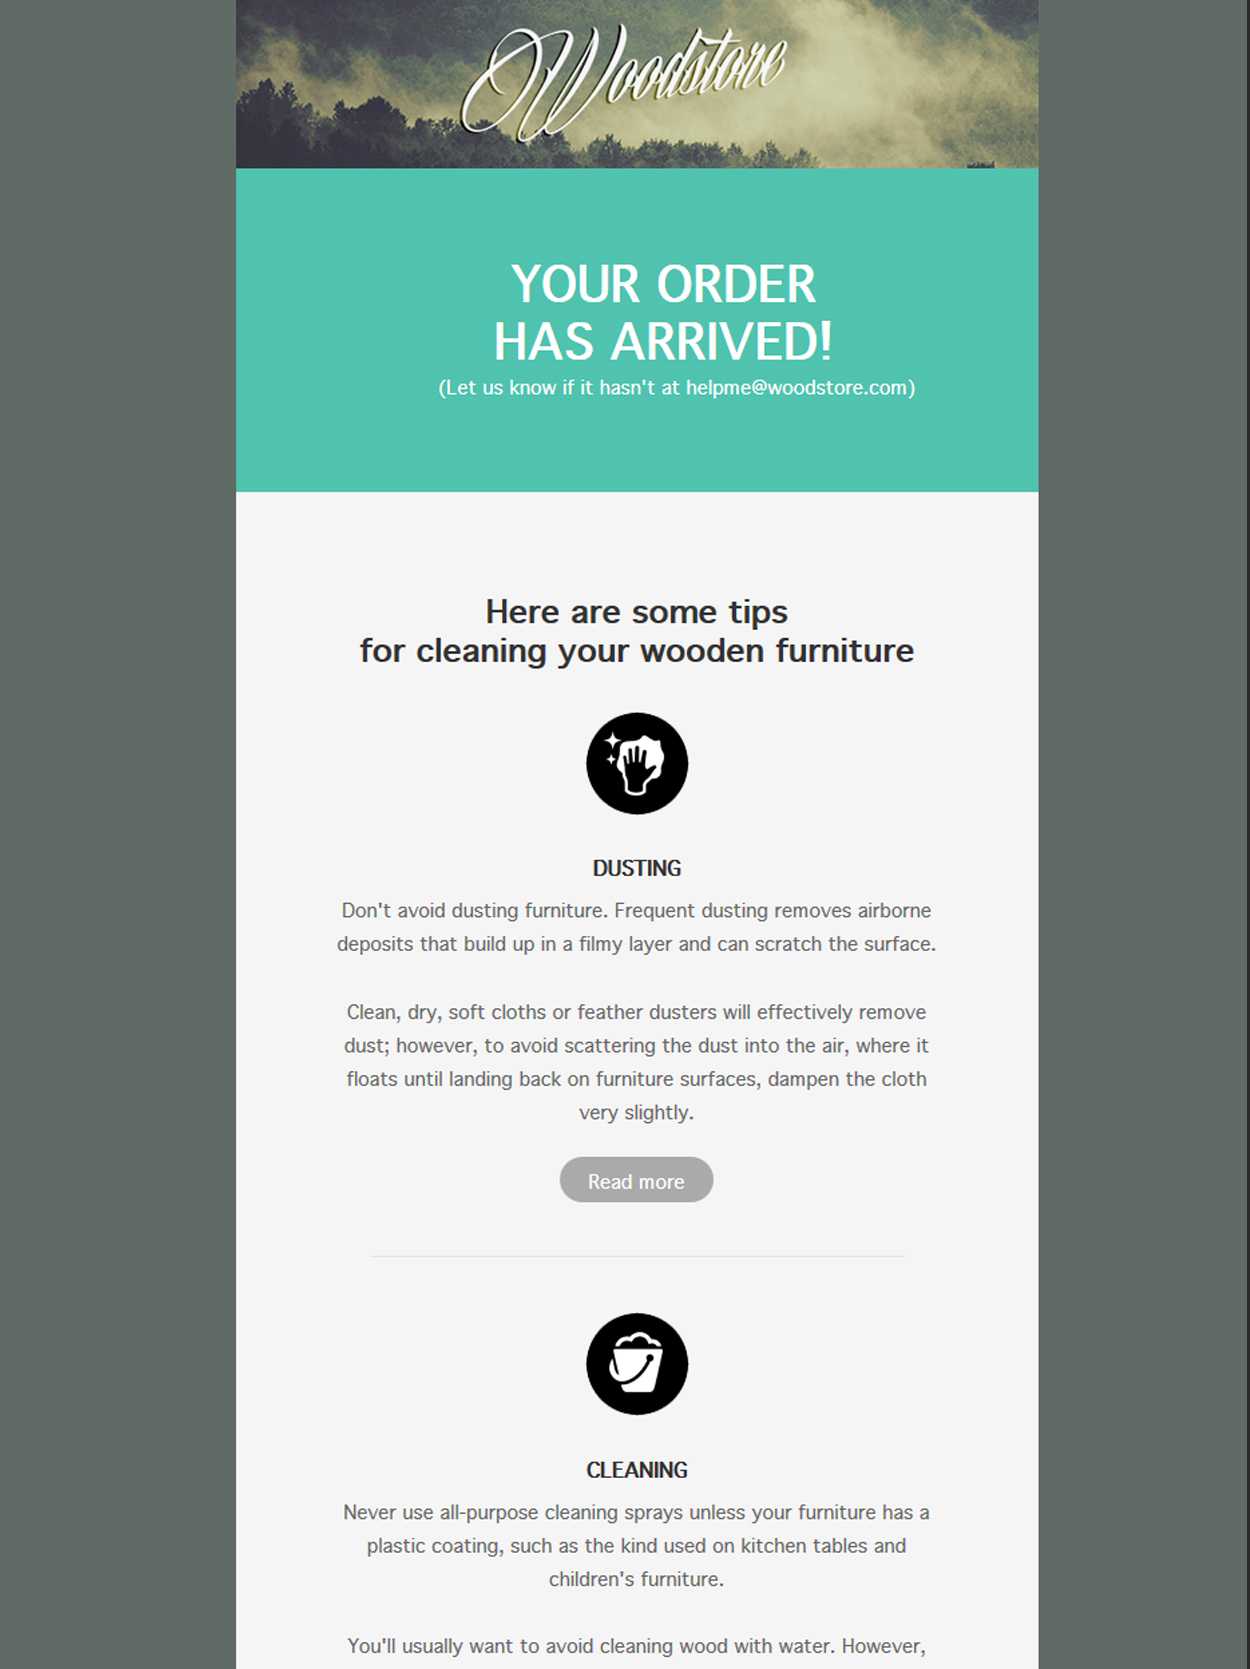 Start with one of our landing page templates